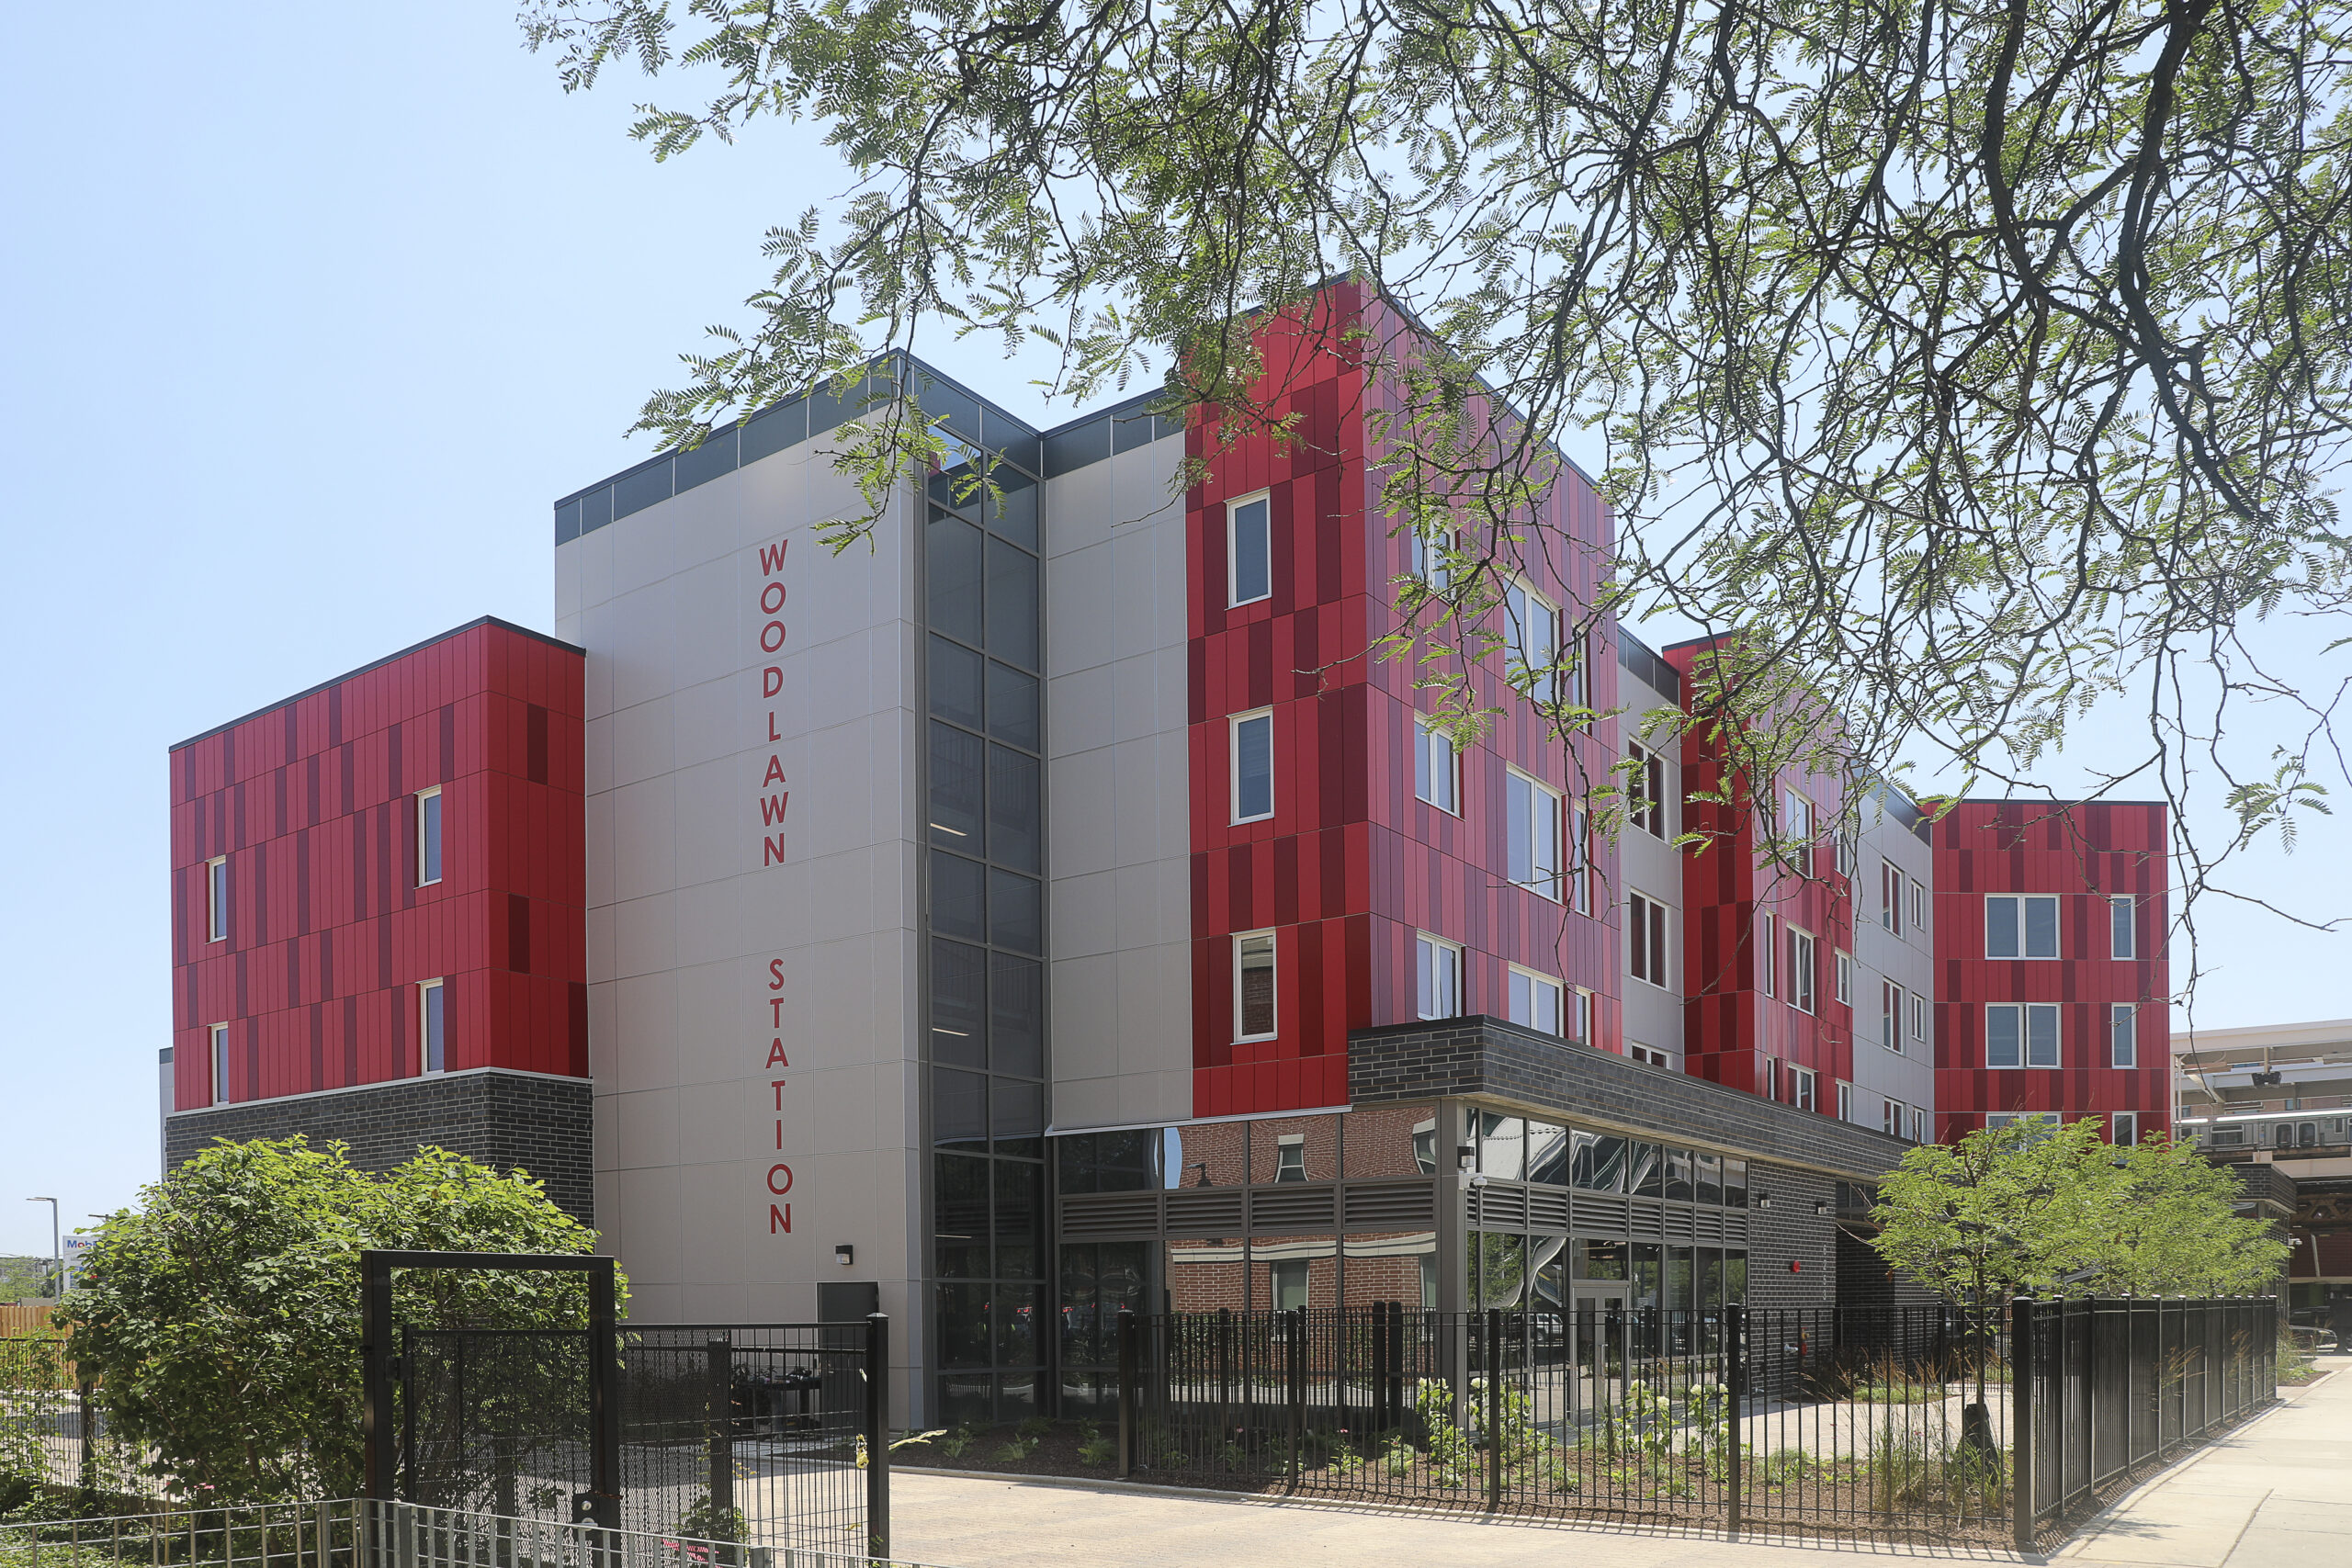 Skender Completes Transit-Oriented Affordable Housing Development on Chicago’s South Side